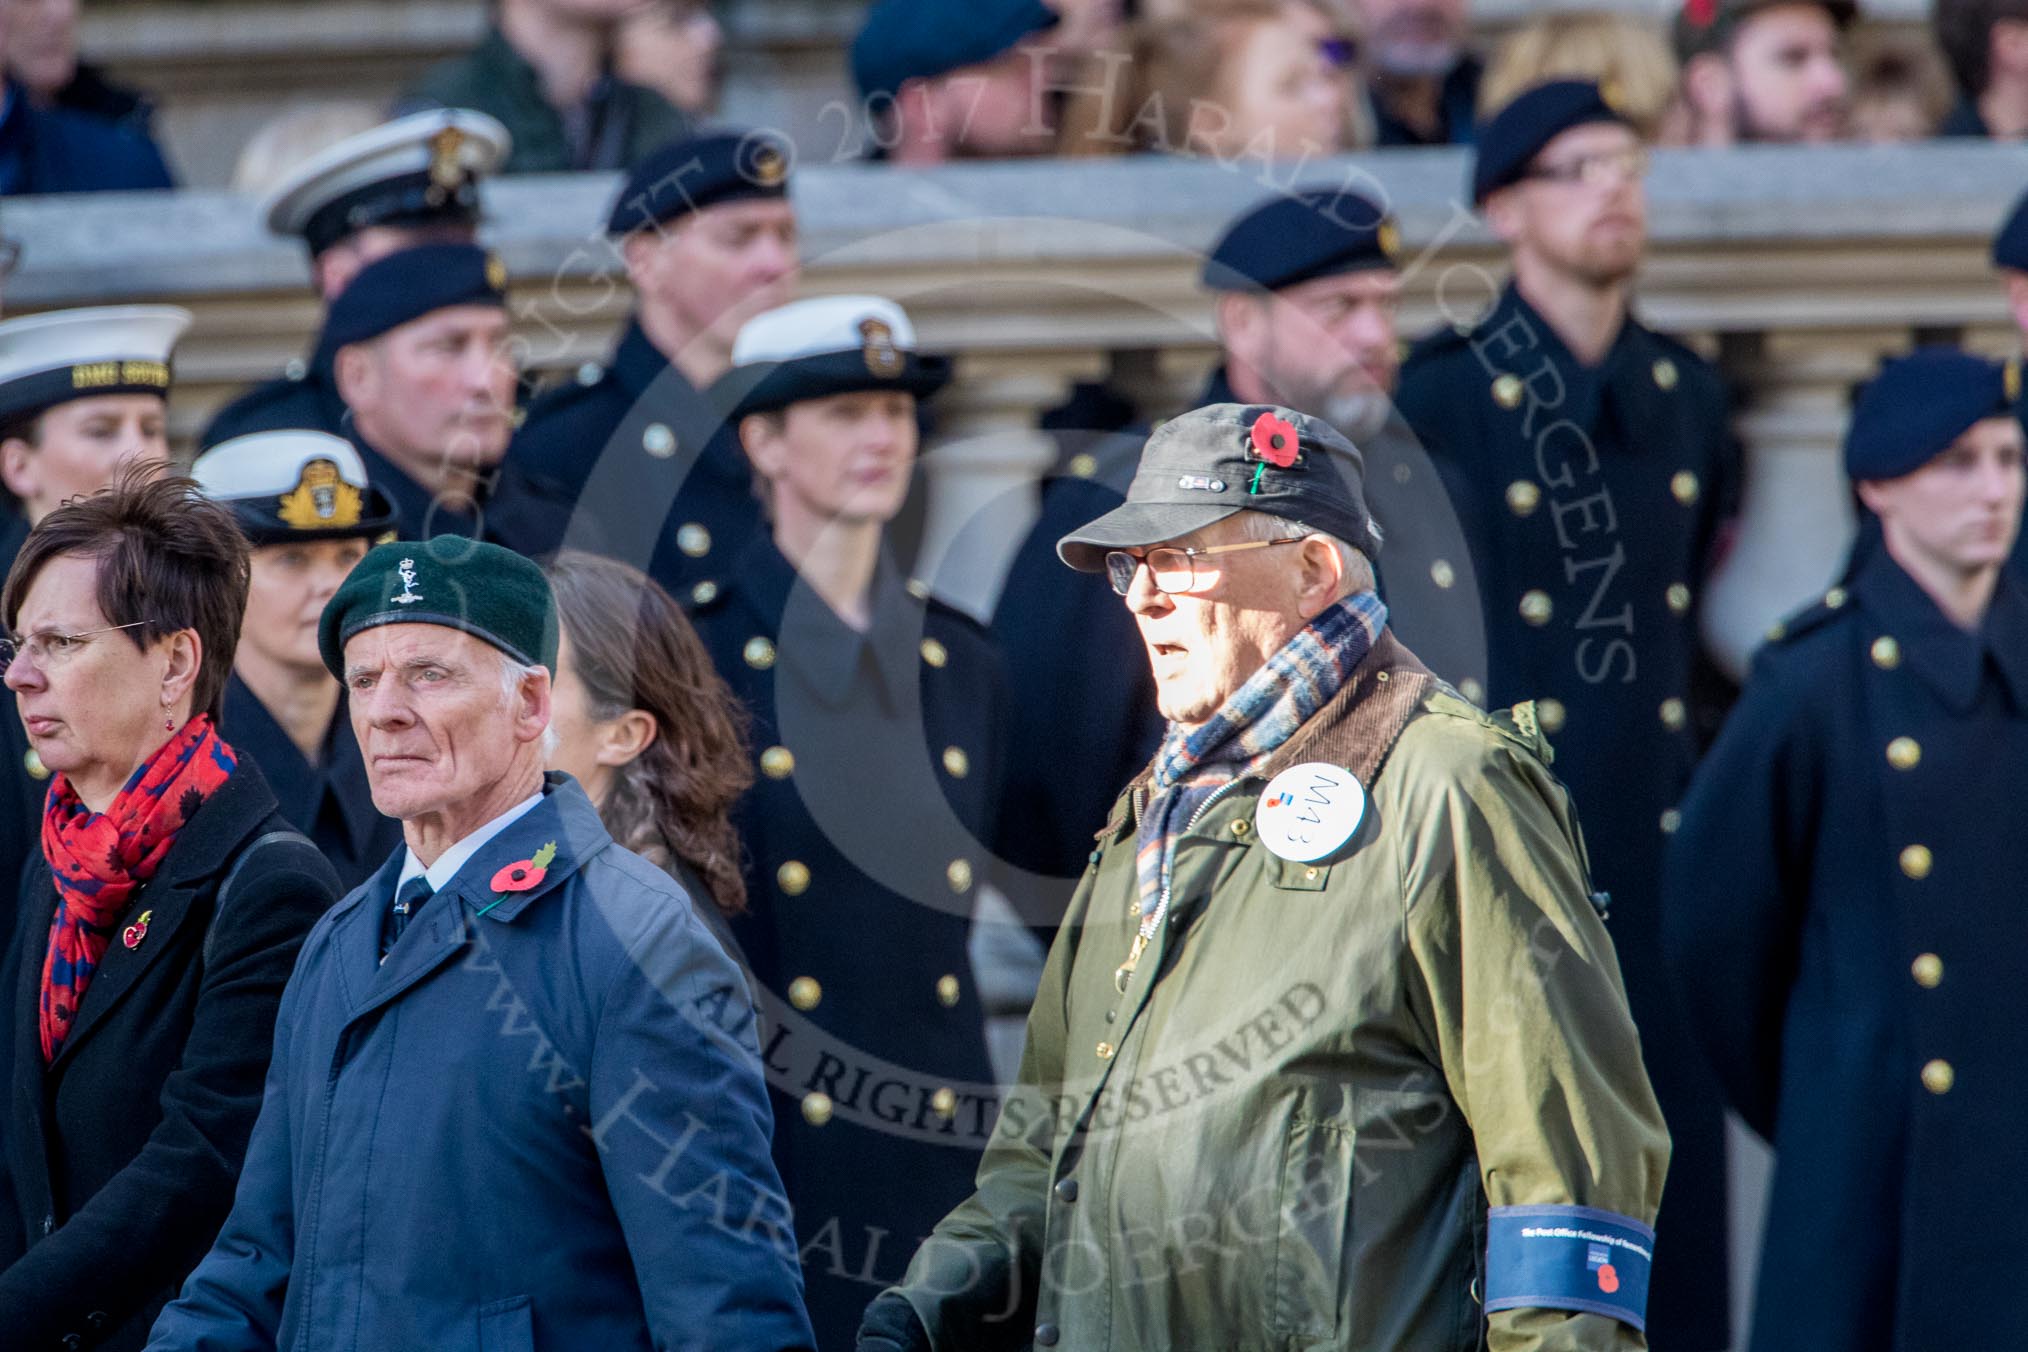 The Post Office Fellowship of Remembrance (Group M43, 8 members) during the Royal British Legion March Past on Remembrance Sunday at the Cenotaph, Whitehall, Westminster, London, 11 November 2018, 12:31.